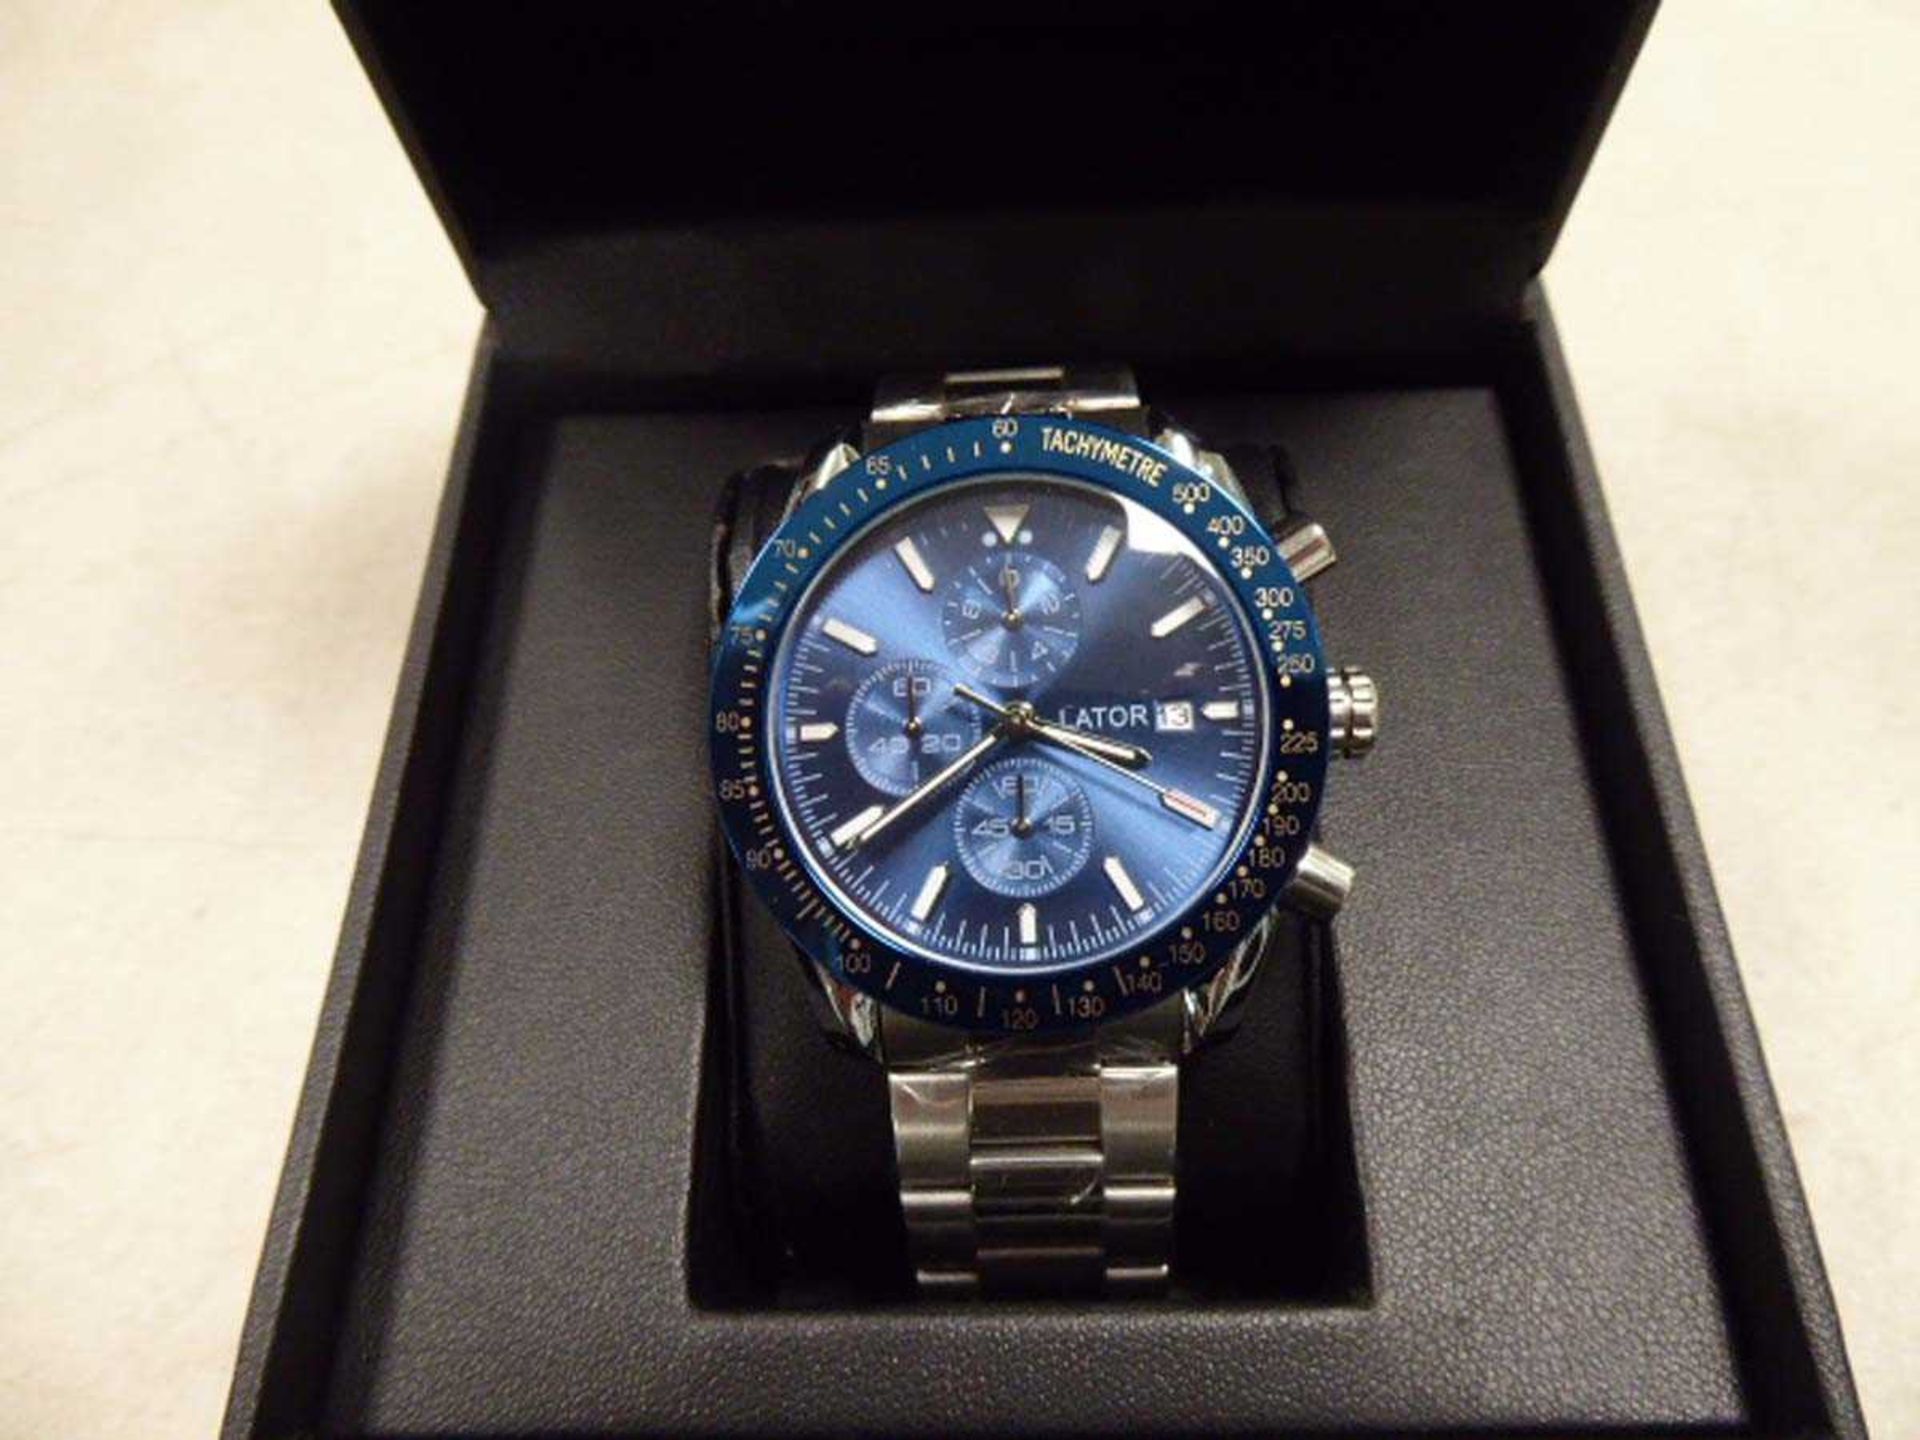 +VAT Lator Calibre stainless steel strap chronograph dial wrist watch with box - Image 2 of 2